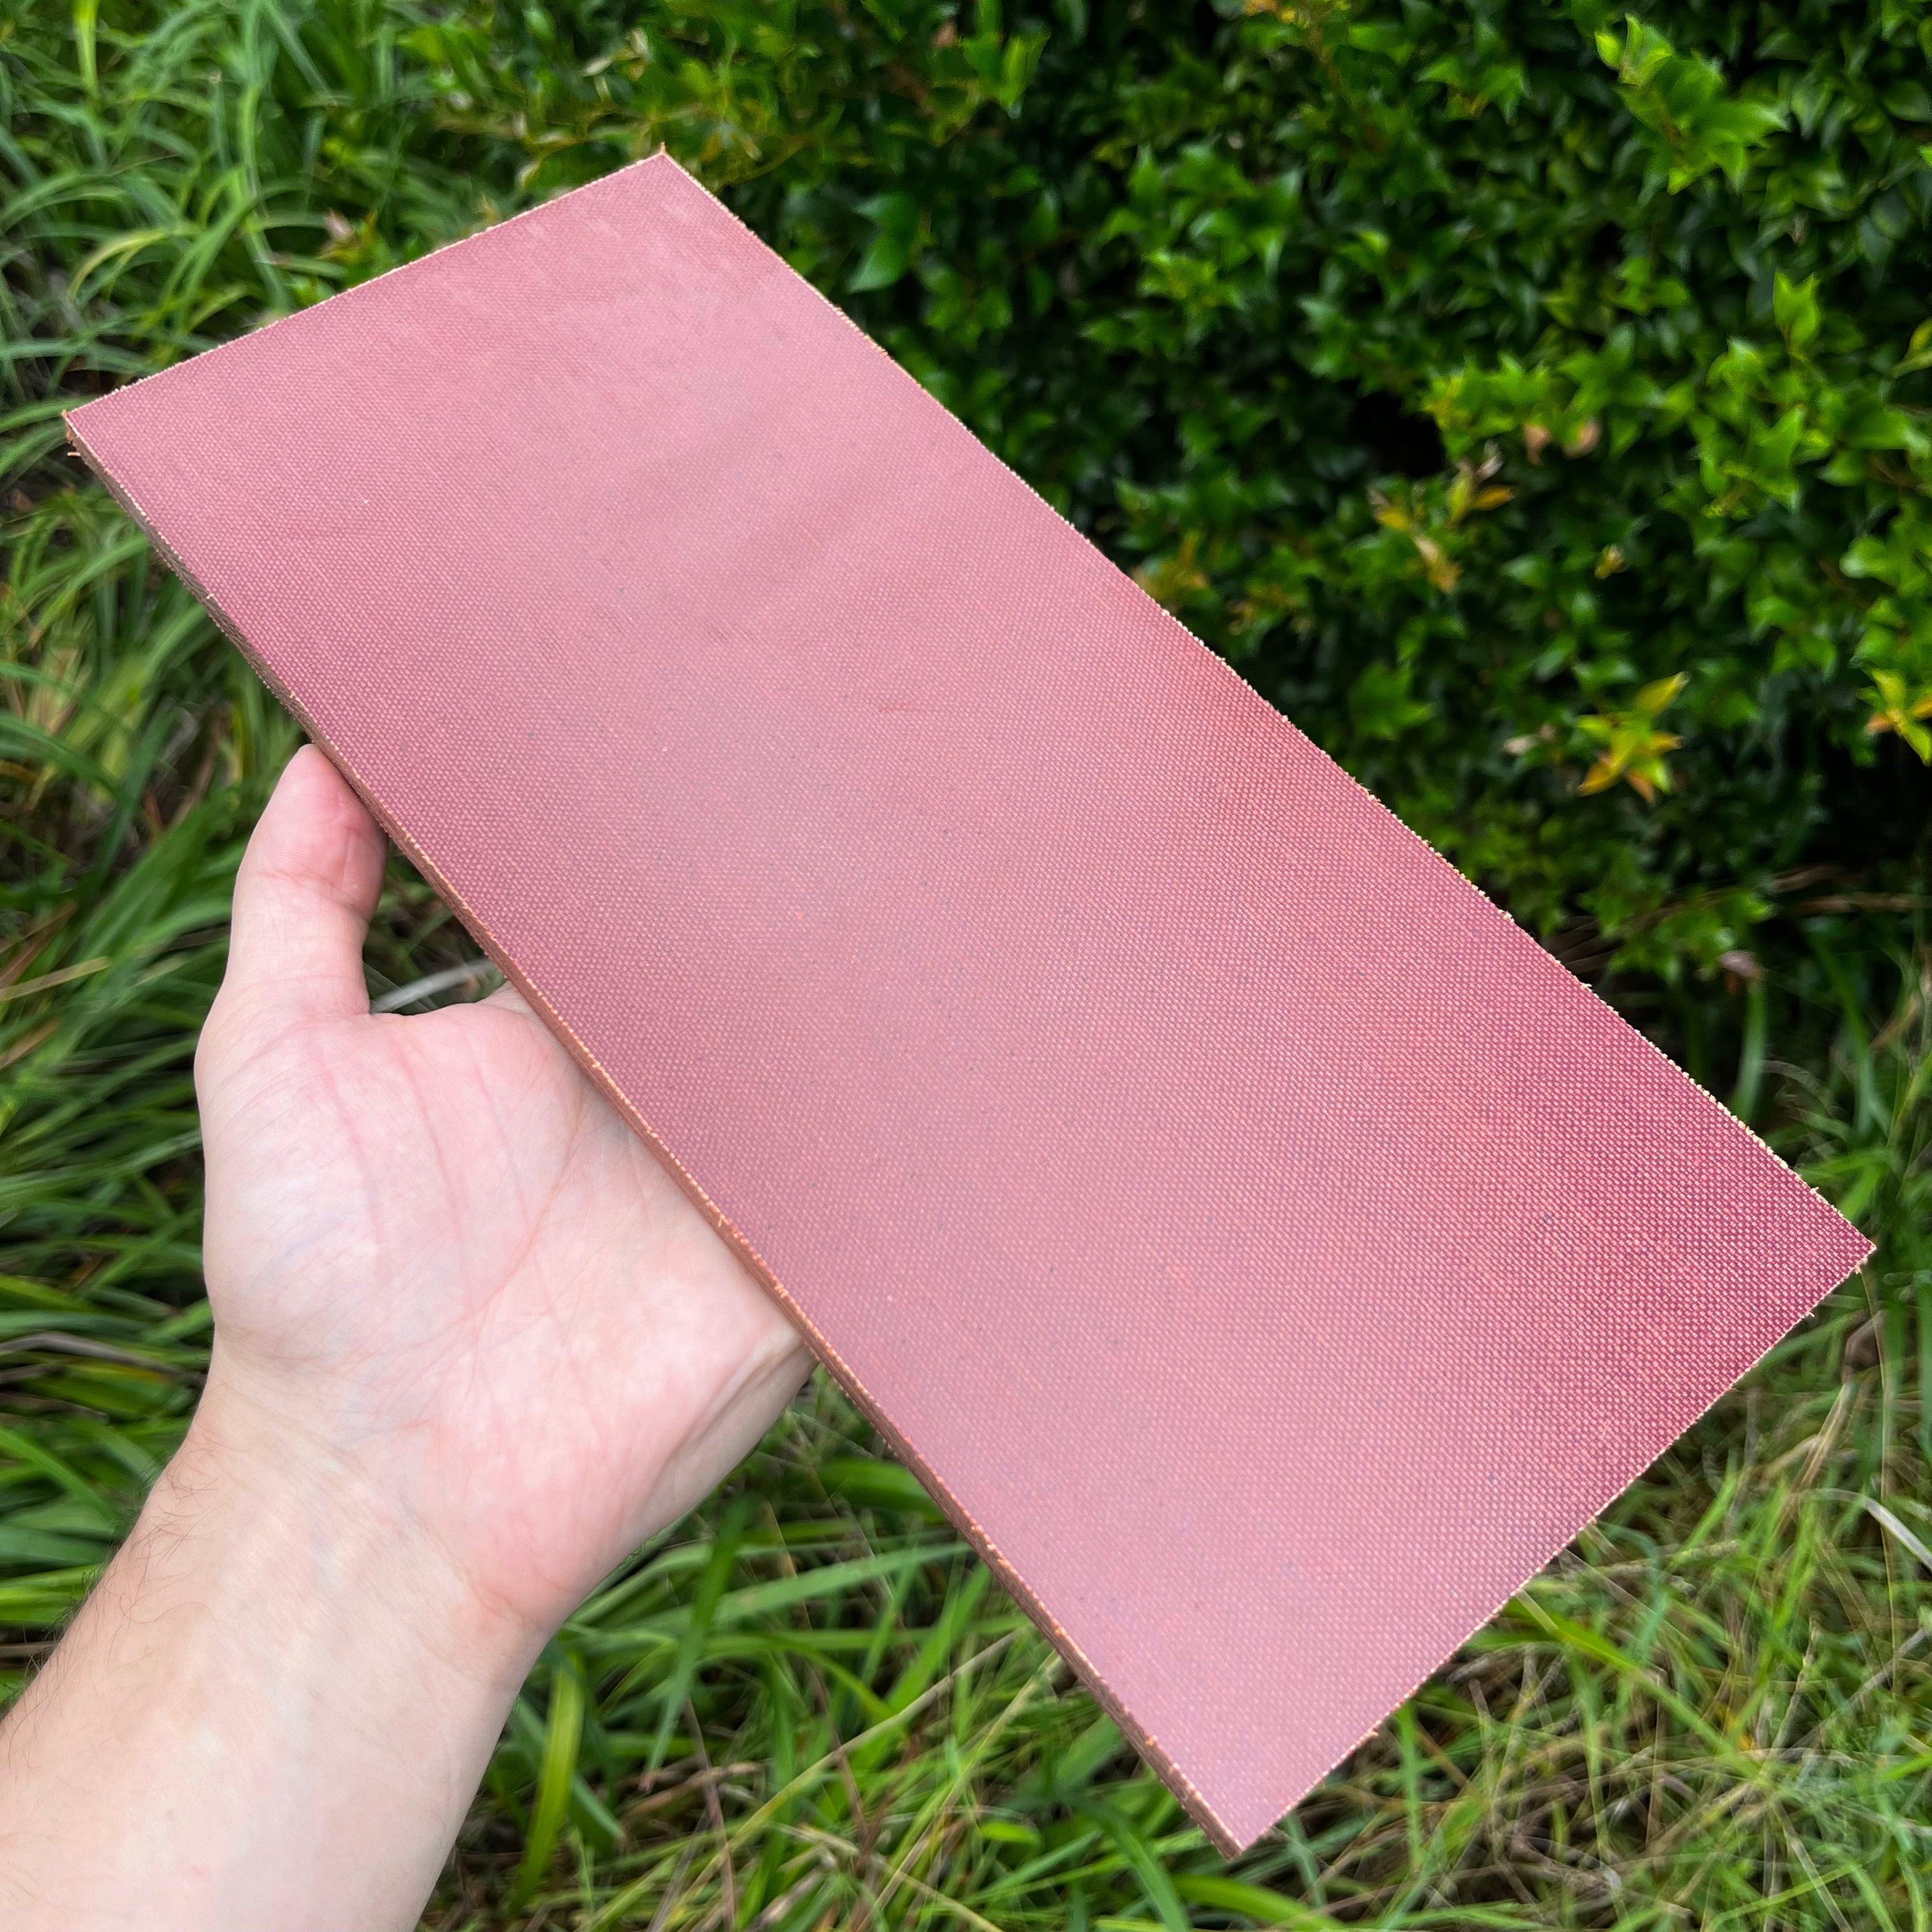 Canvas Micarta 3/8" Sheets & Scales - Fire Red